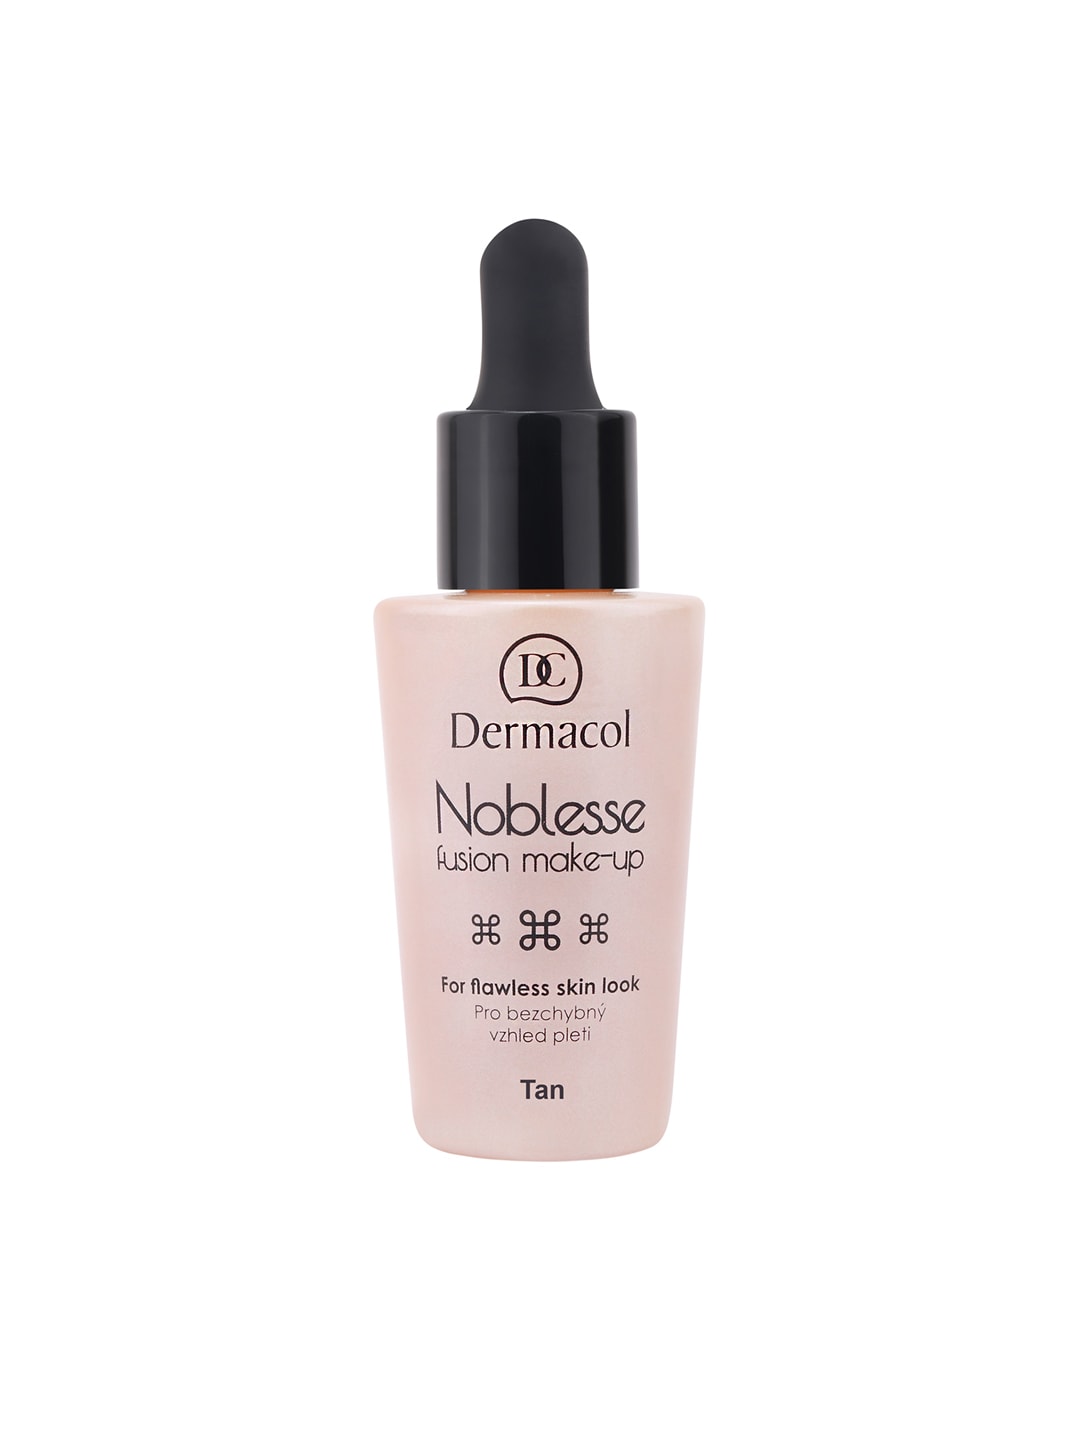 Dermacol Noblesse Fusion Make up - Tan 4 Price in India